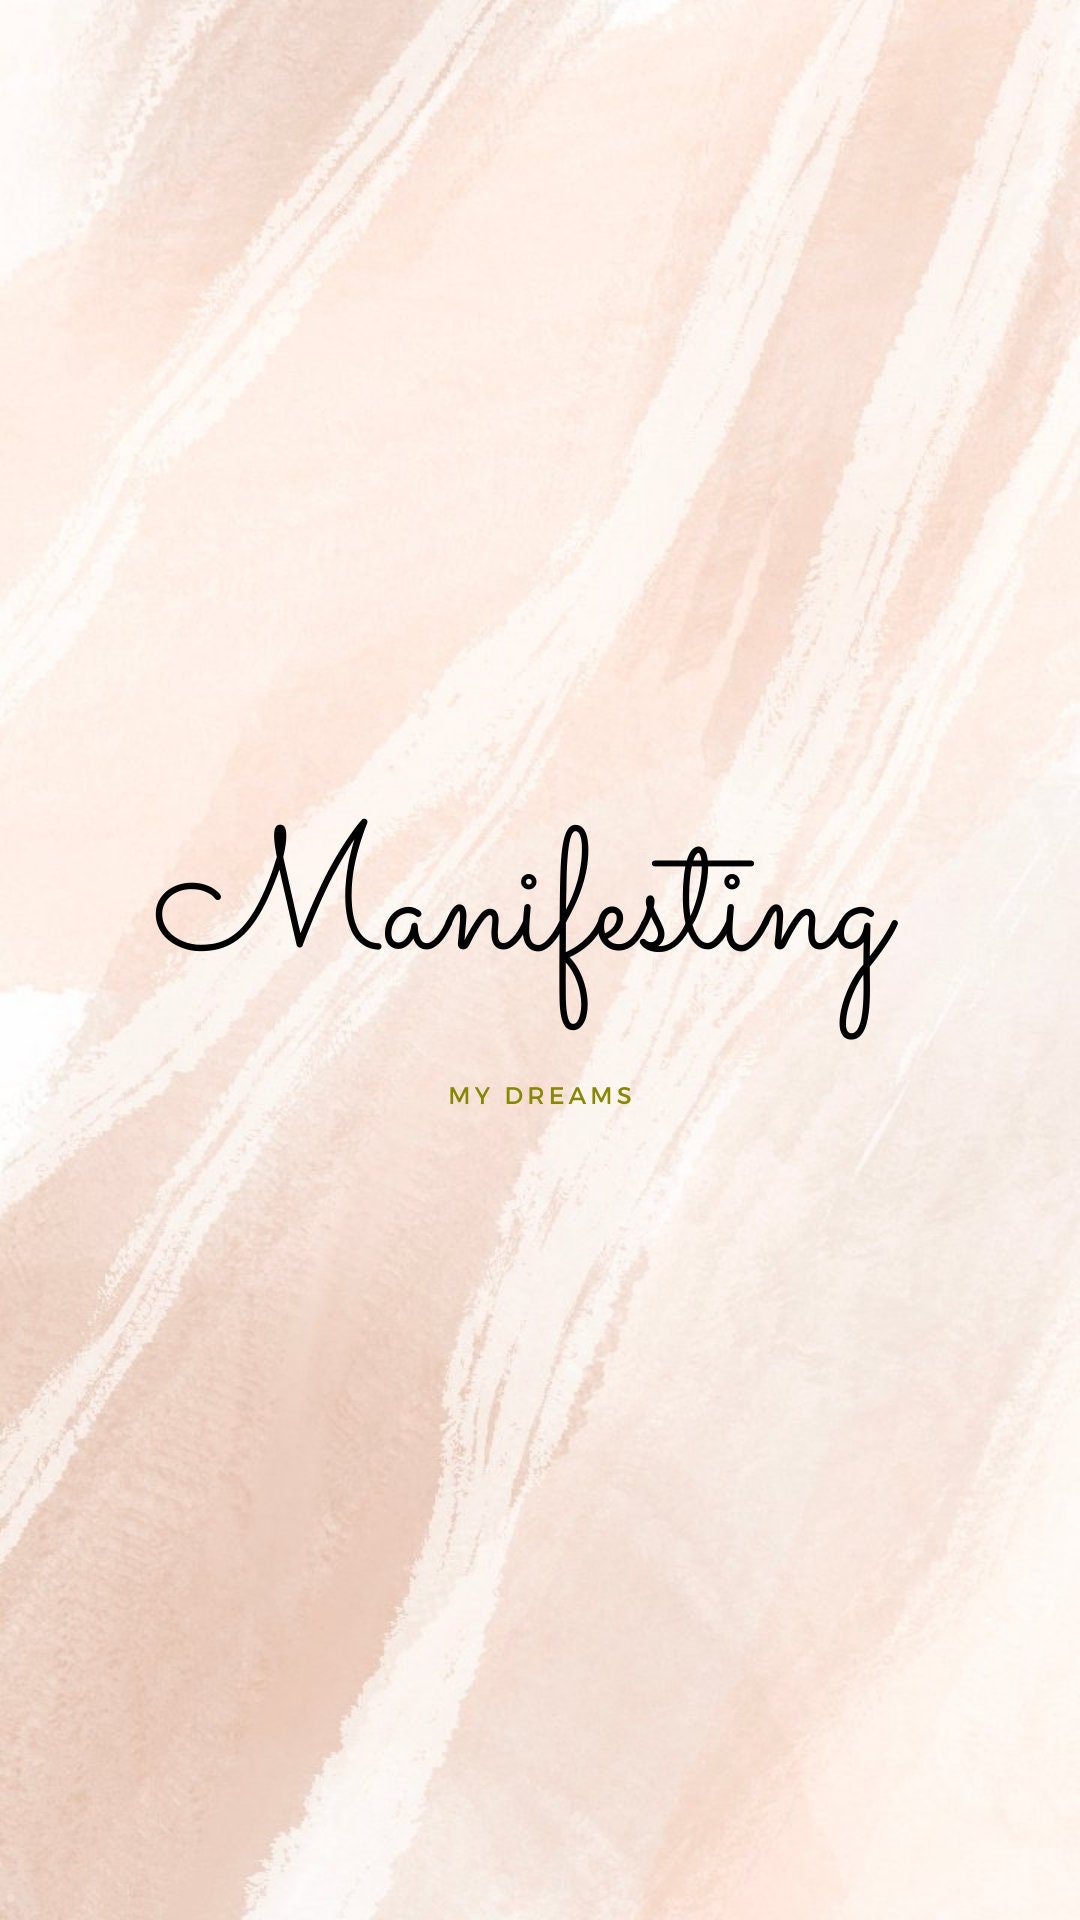 Dear Universe Manifestation Journal With Pastel Women Images and  Inspirational Quotes  Manifest BigE Amazonsg Books